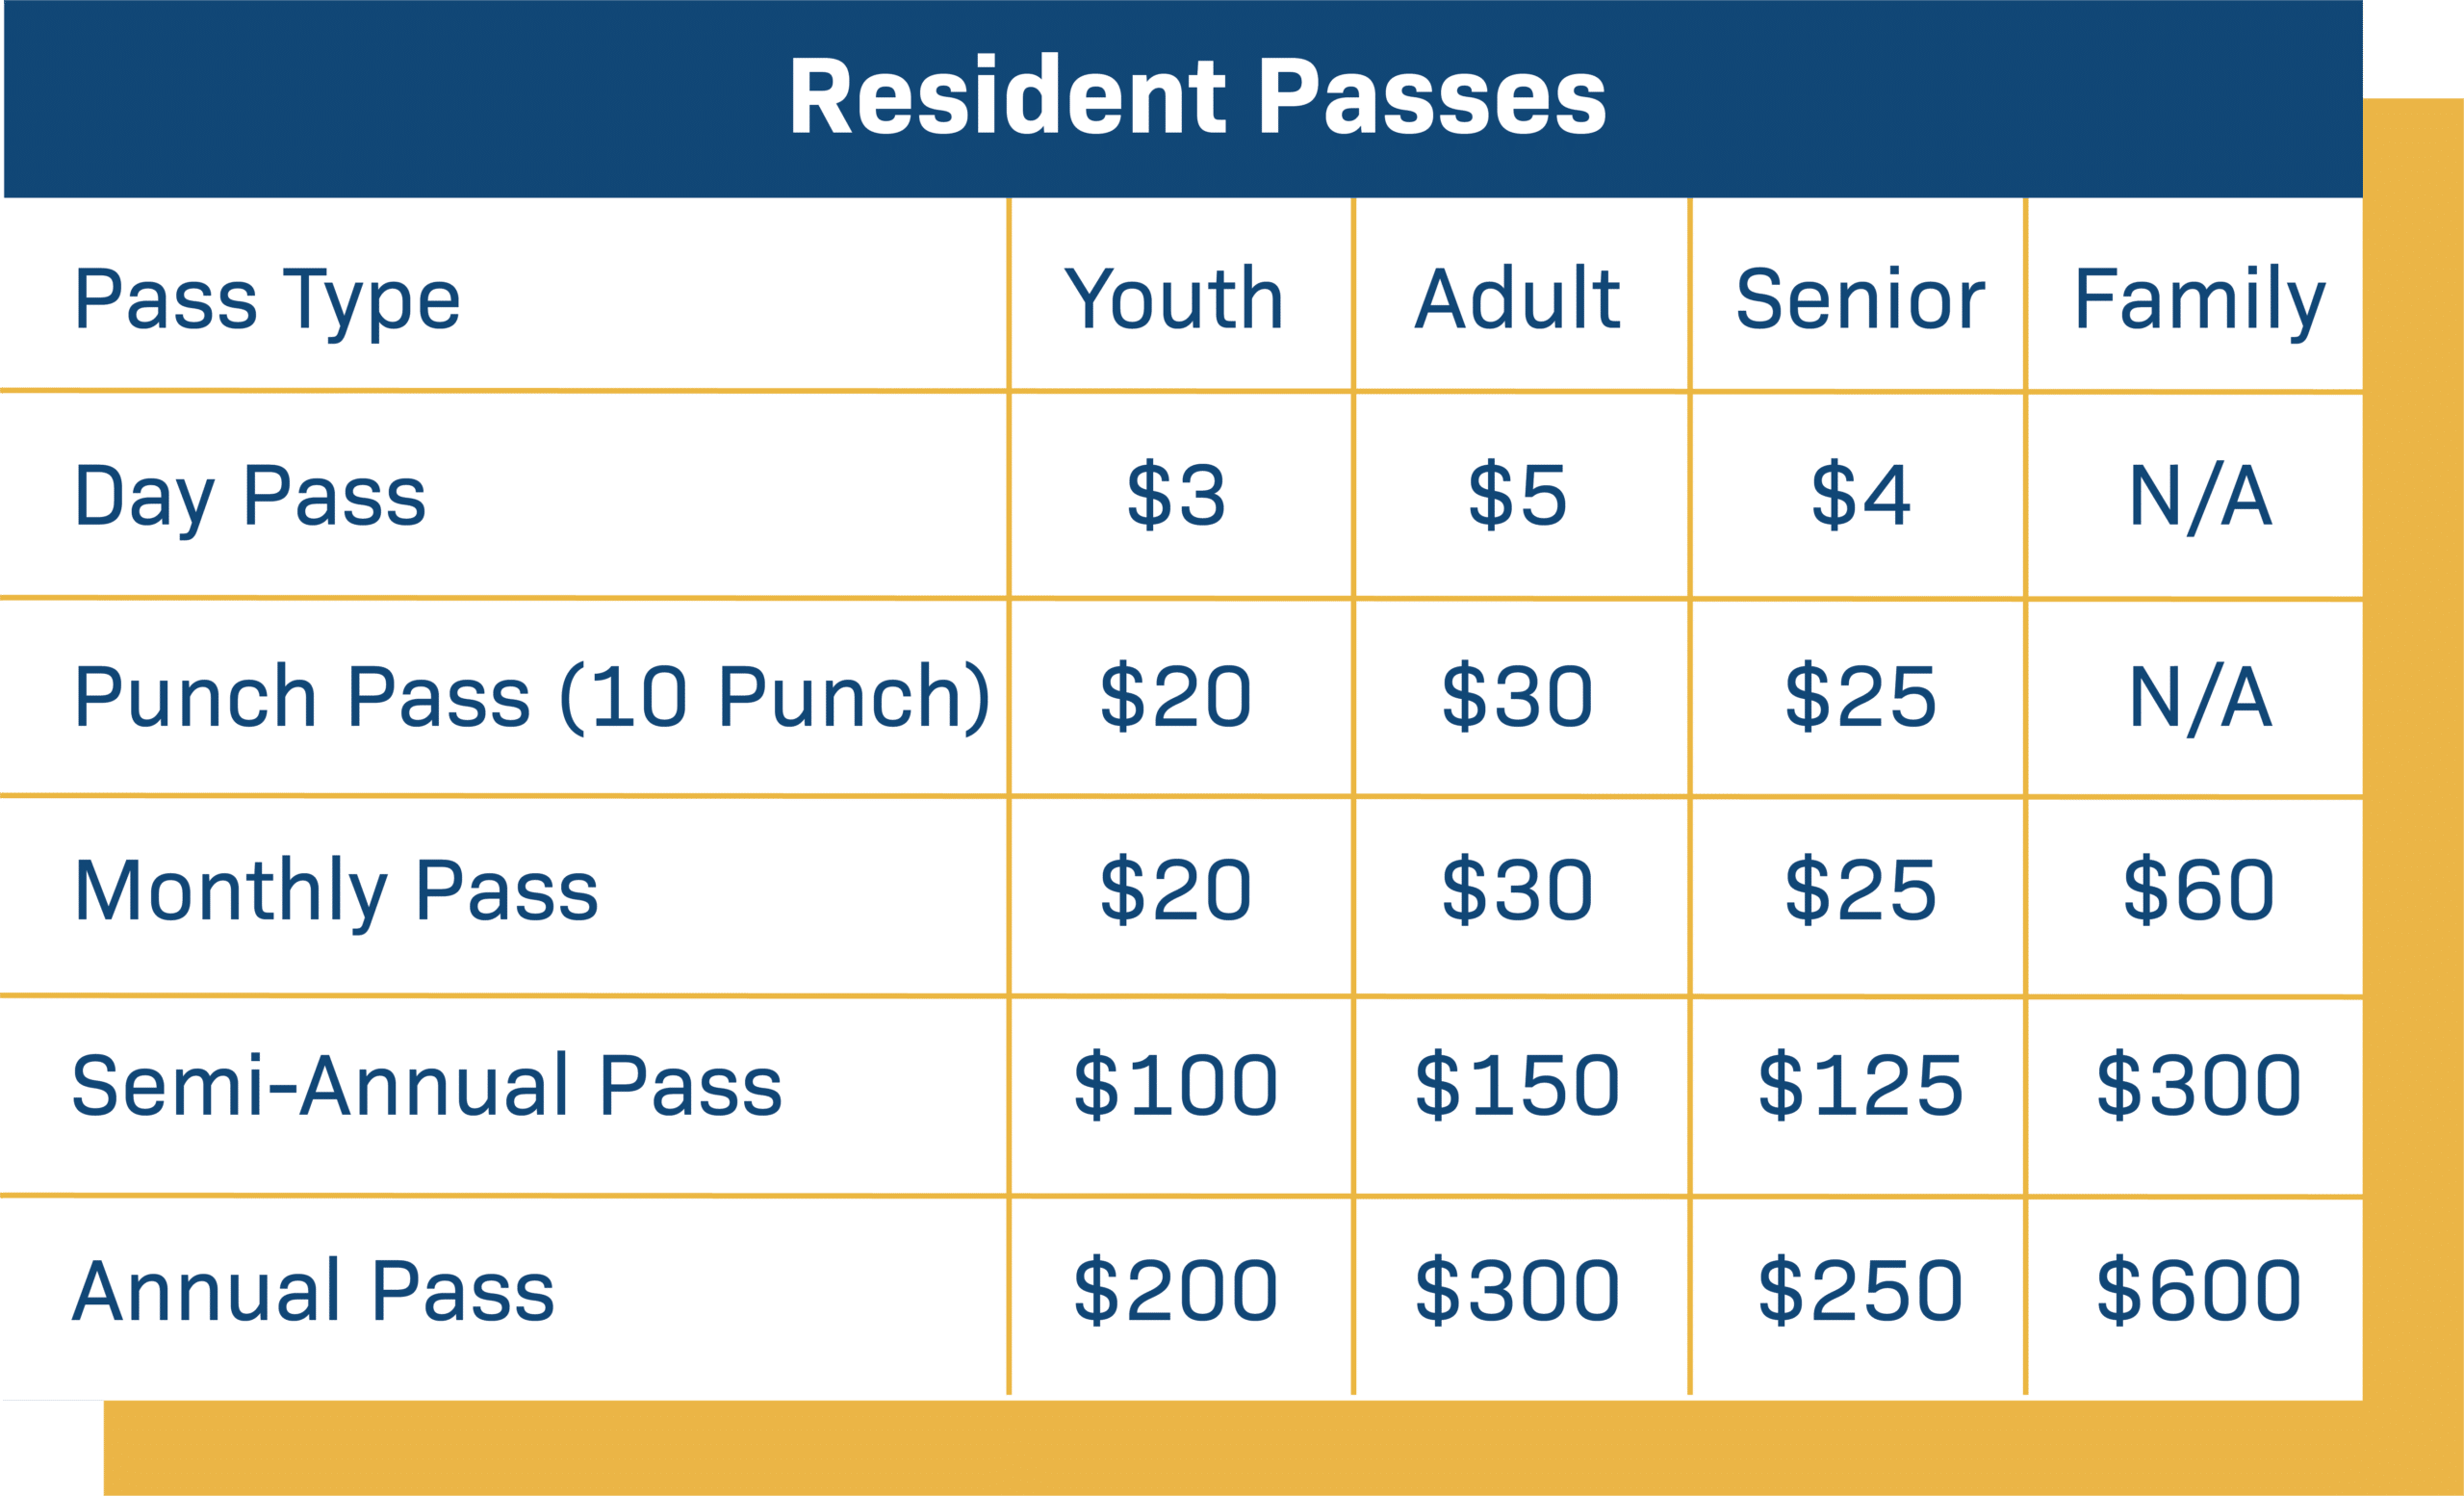 goodyear-recreation-campus-resident-passes-pricing